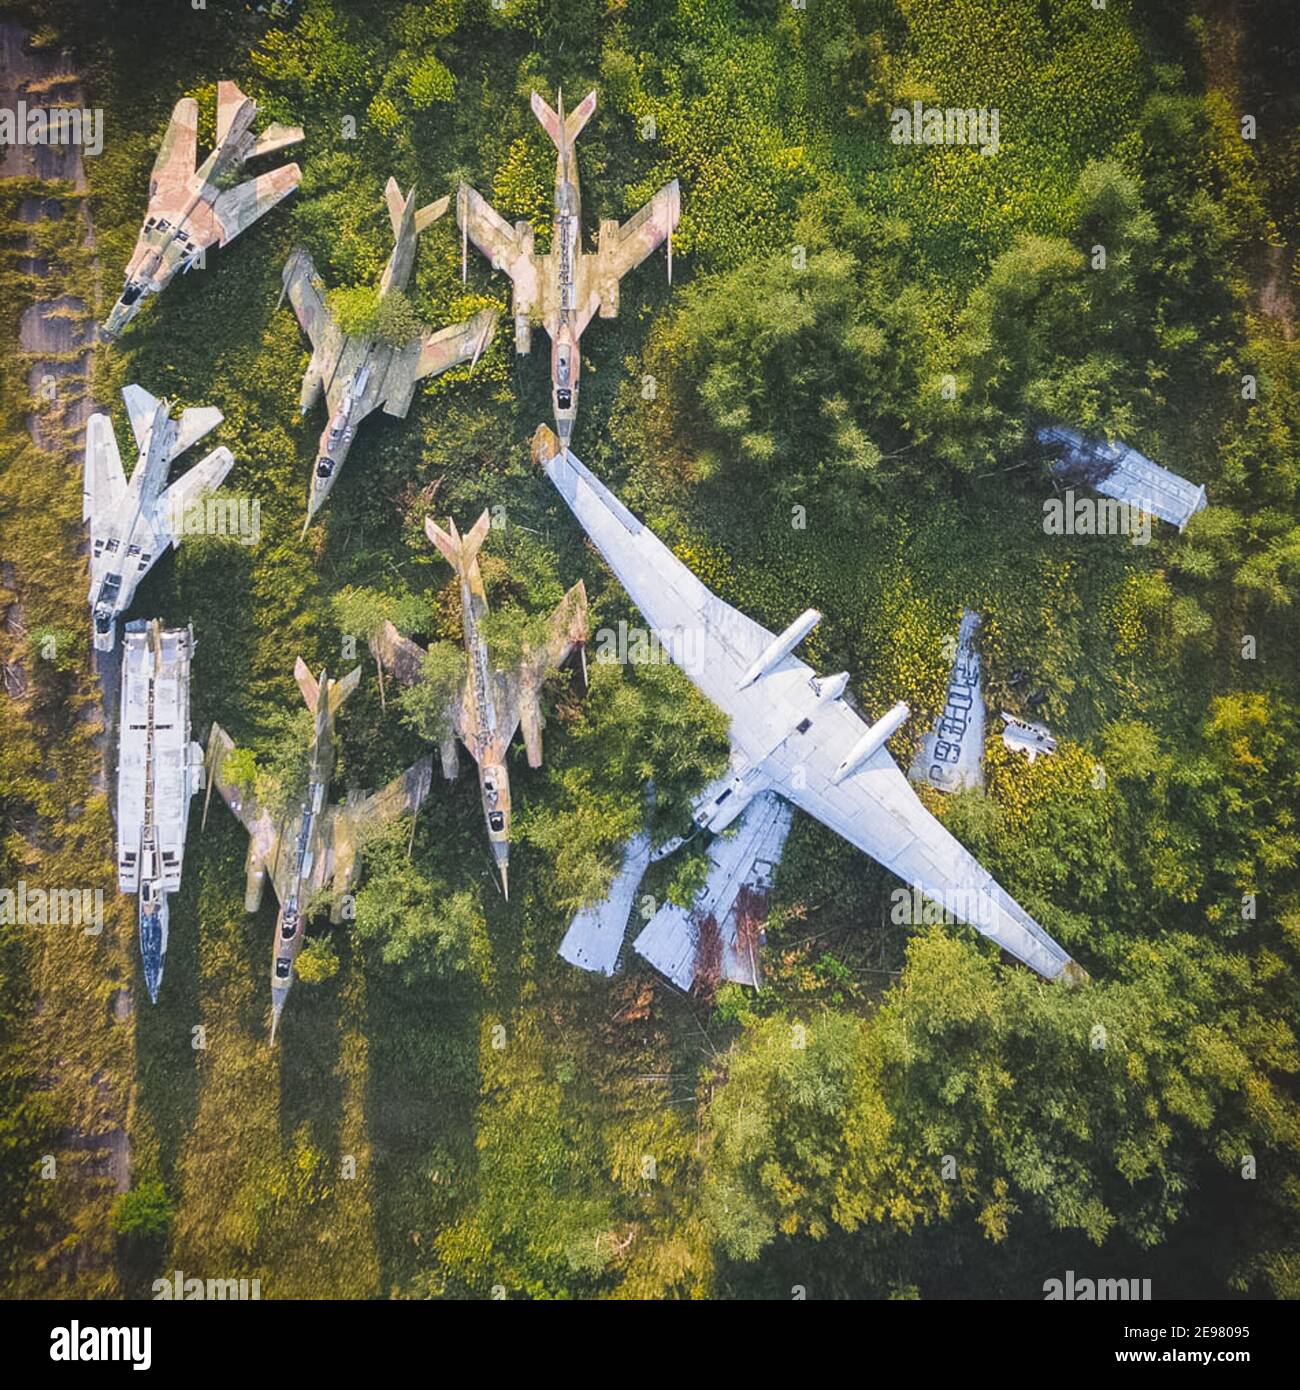 Abandoned warplanes. The old airfield. Abandoned warplanes. The old airfield. Stock Photo